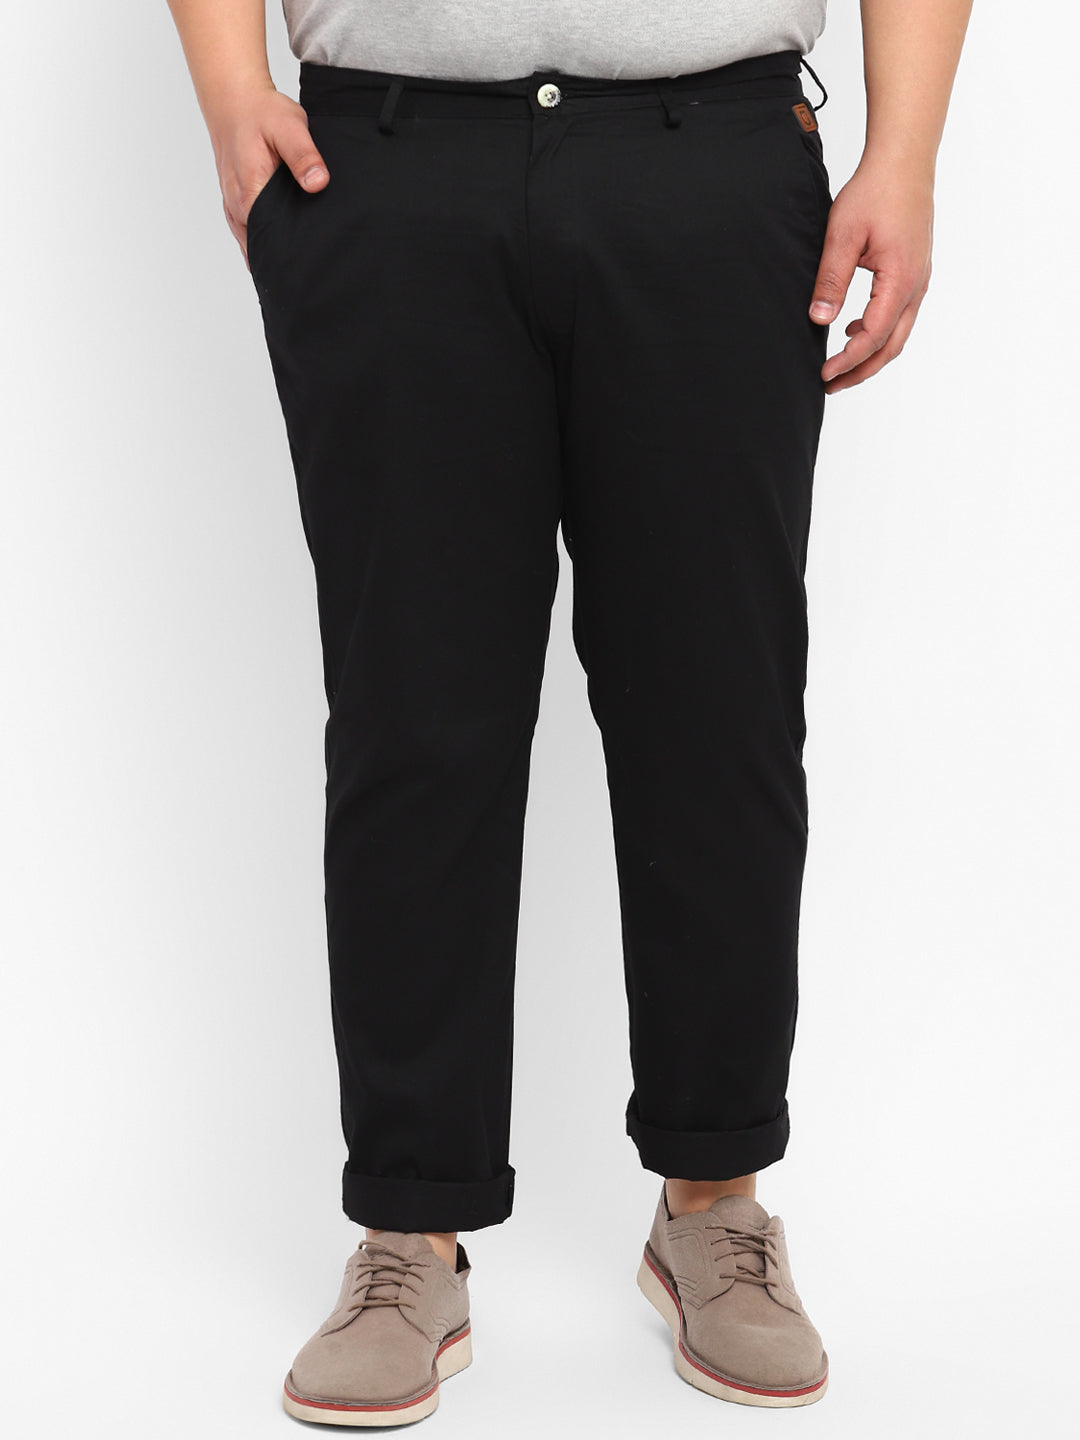 Plus Men's Black Cotton Light Weight Non-Stretch Regular Fit Casual Trousers